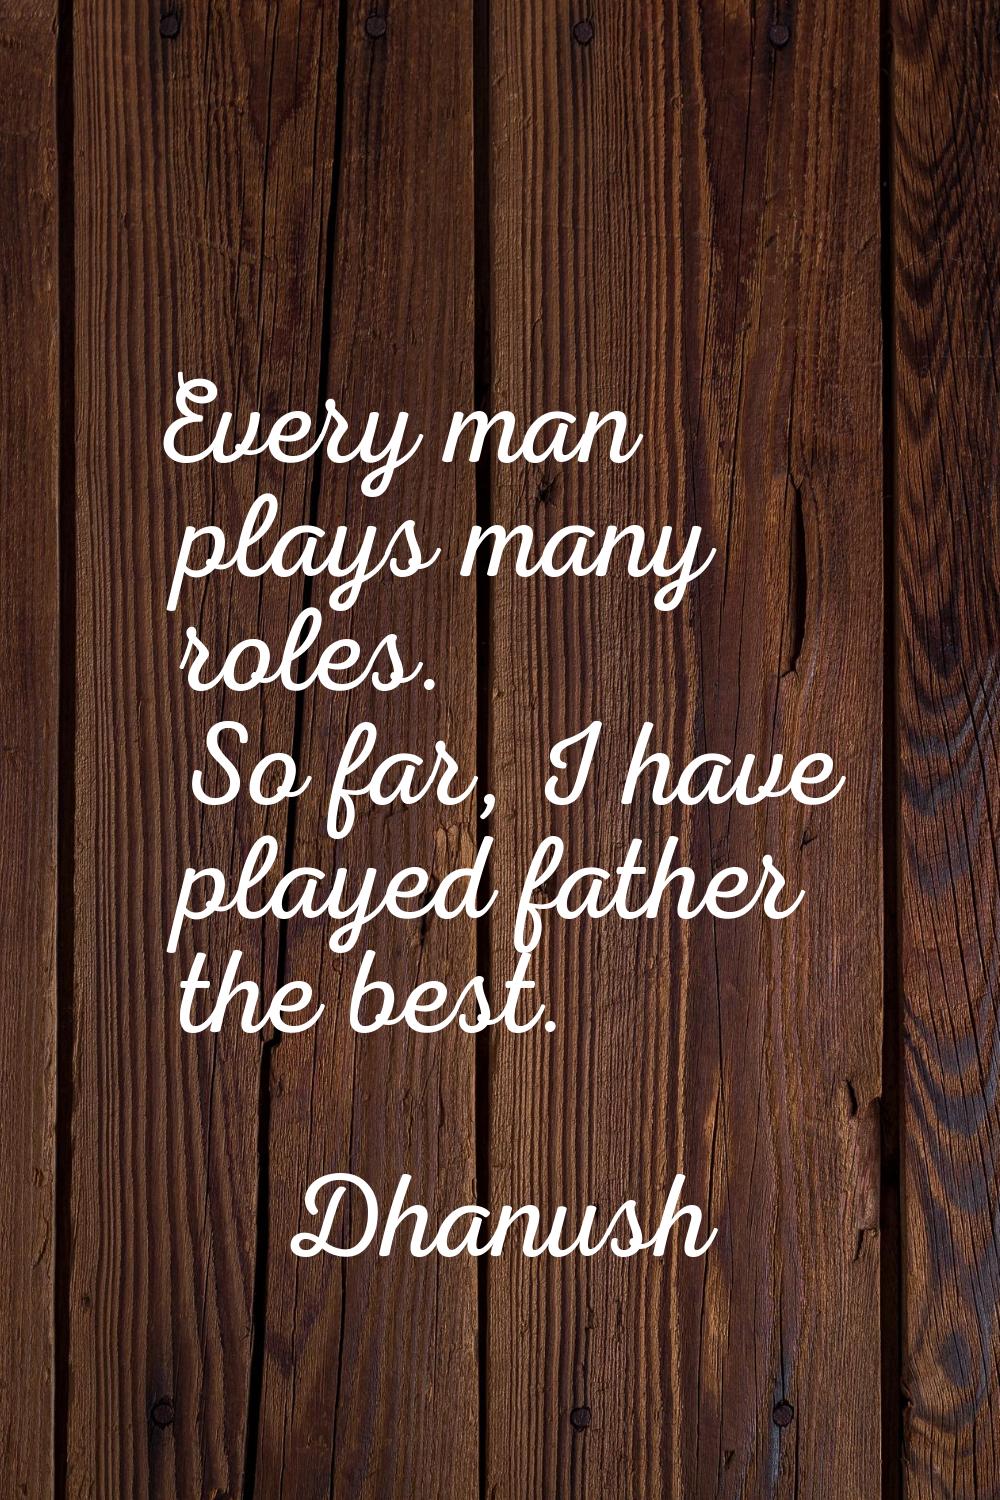 Every man plays many roles. So far, I have played father the best.